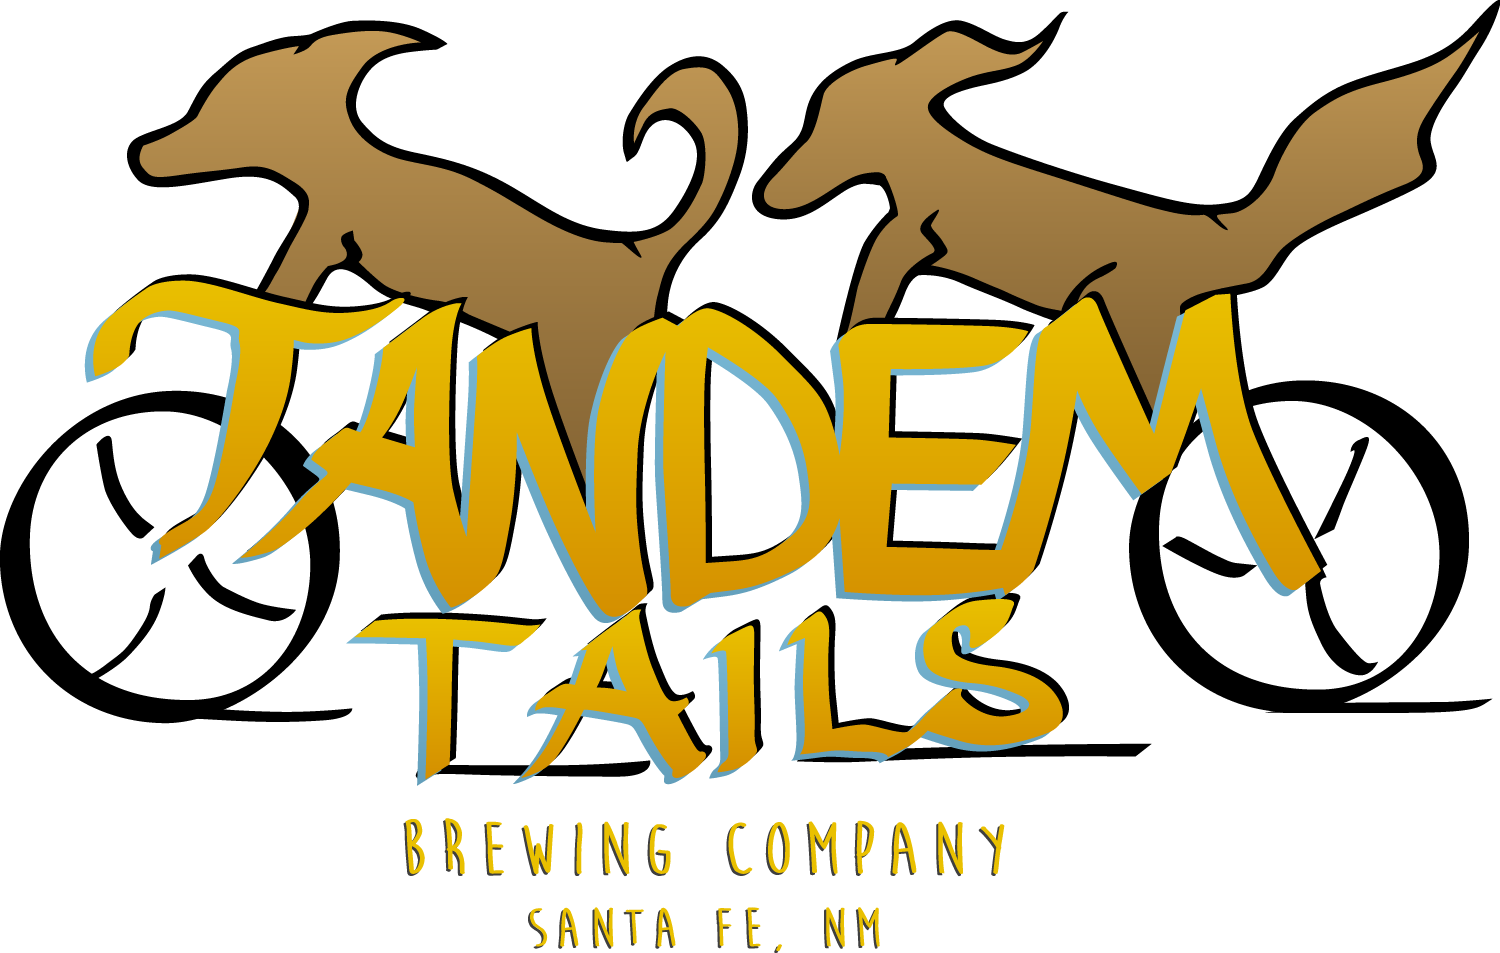 Tandem Tails Brewing Company